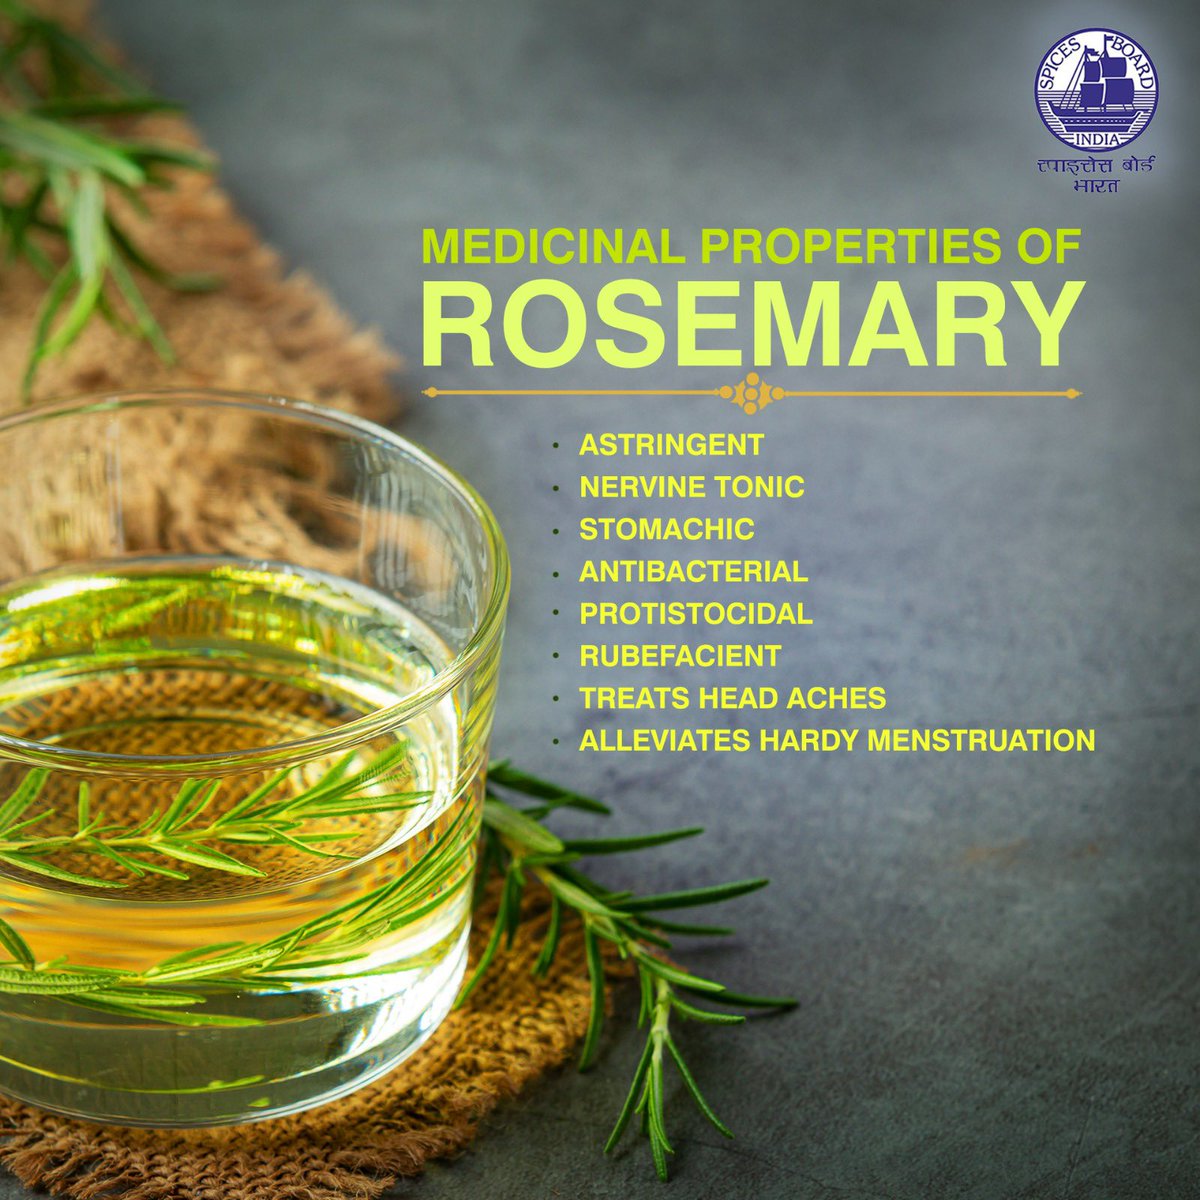 A versatile herb with a range of medicinal properties @doc_goi #spicesboard #rosemary #incrediblespicesofindia